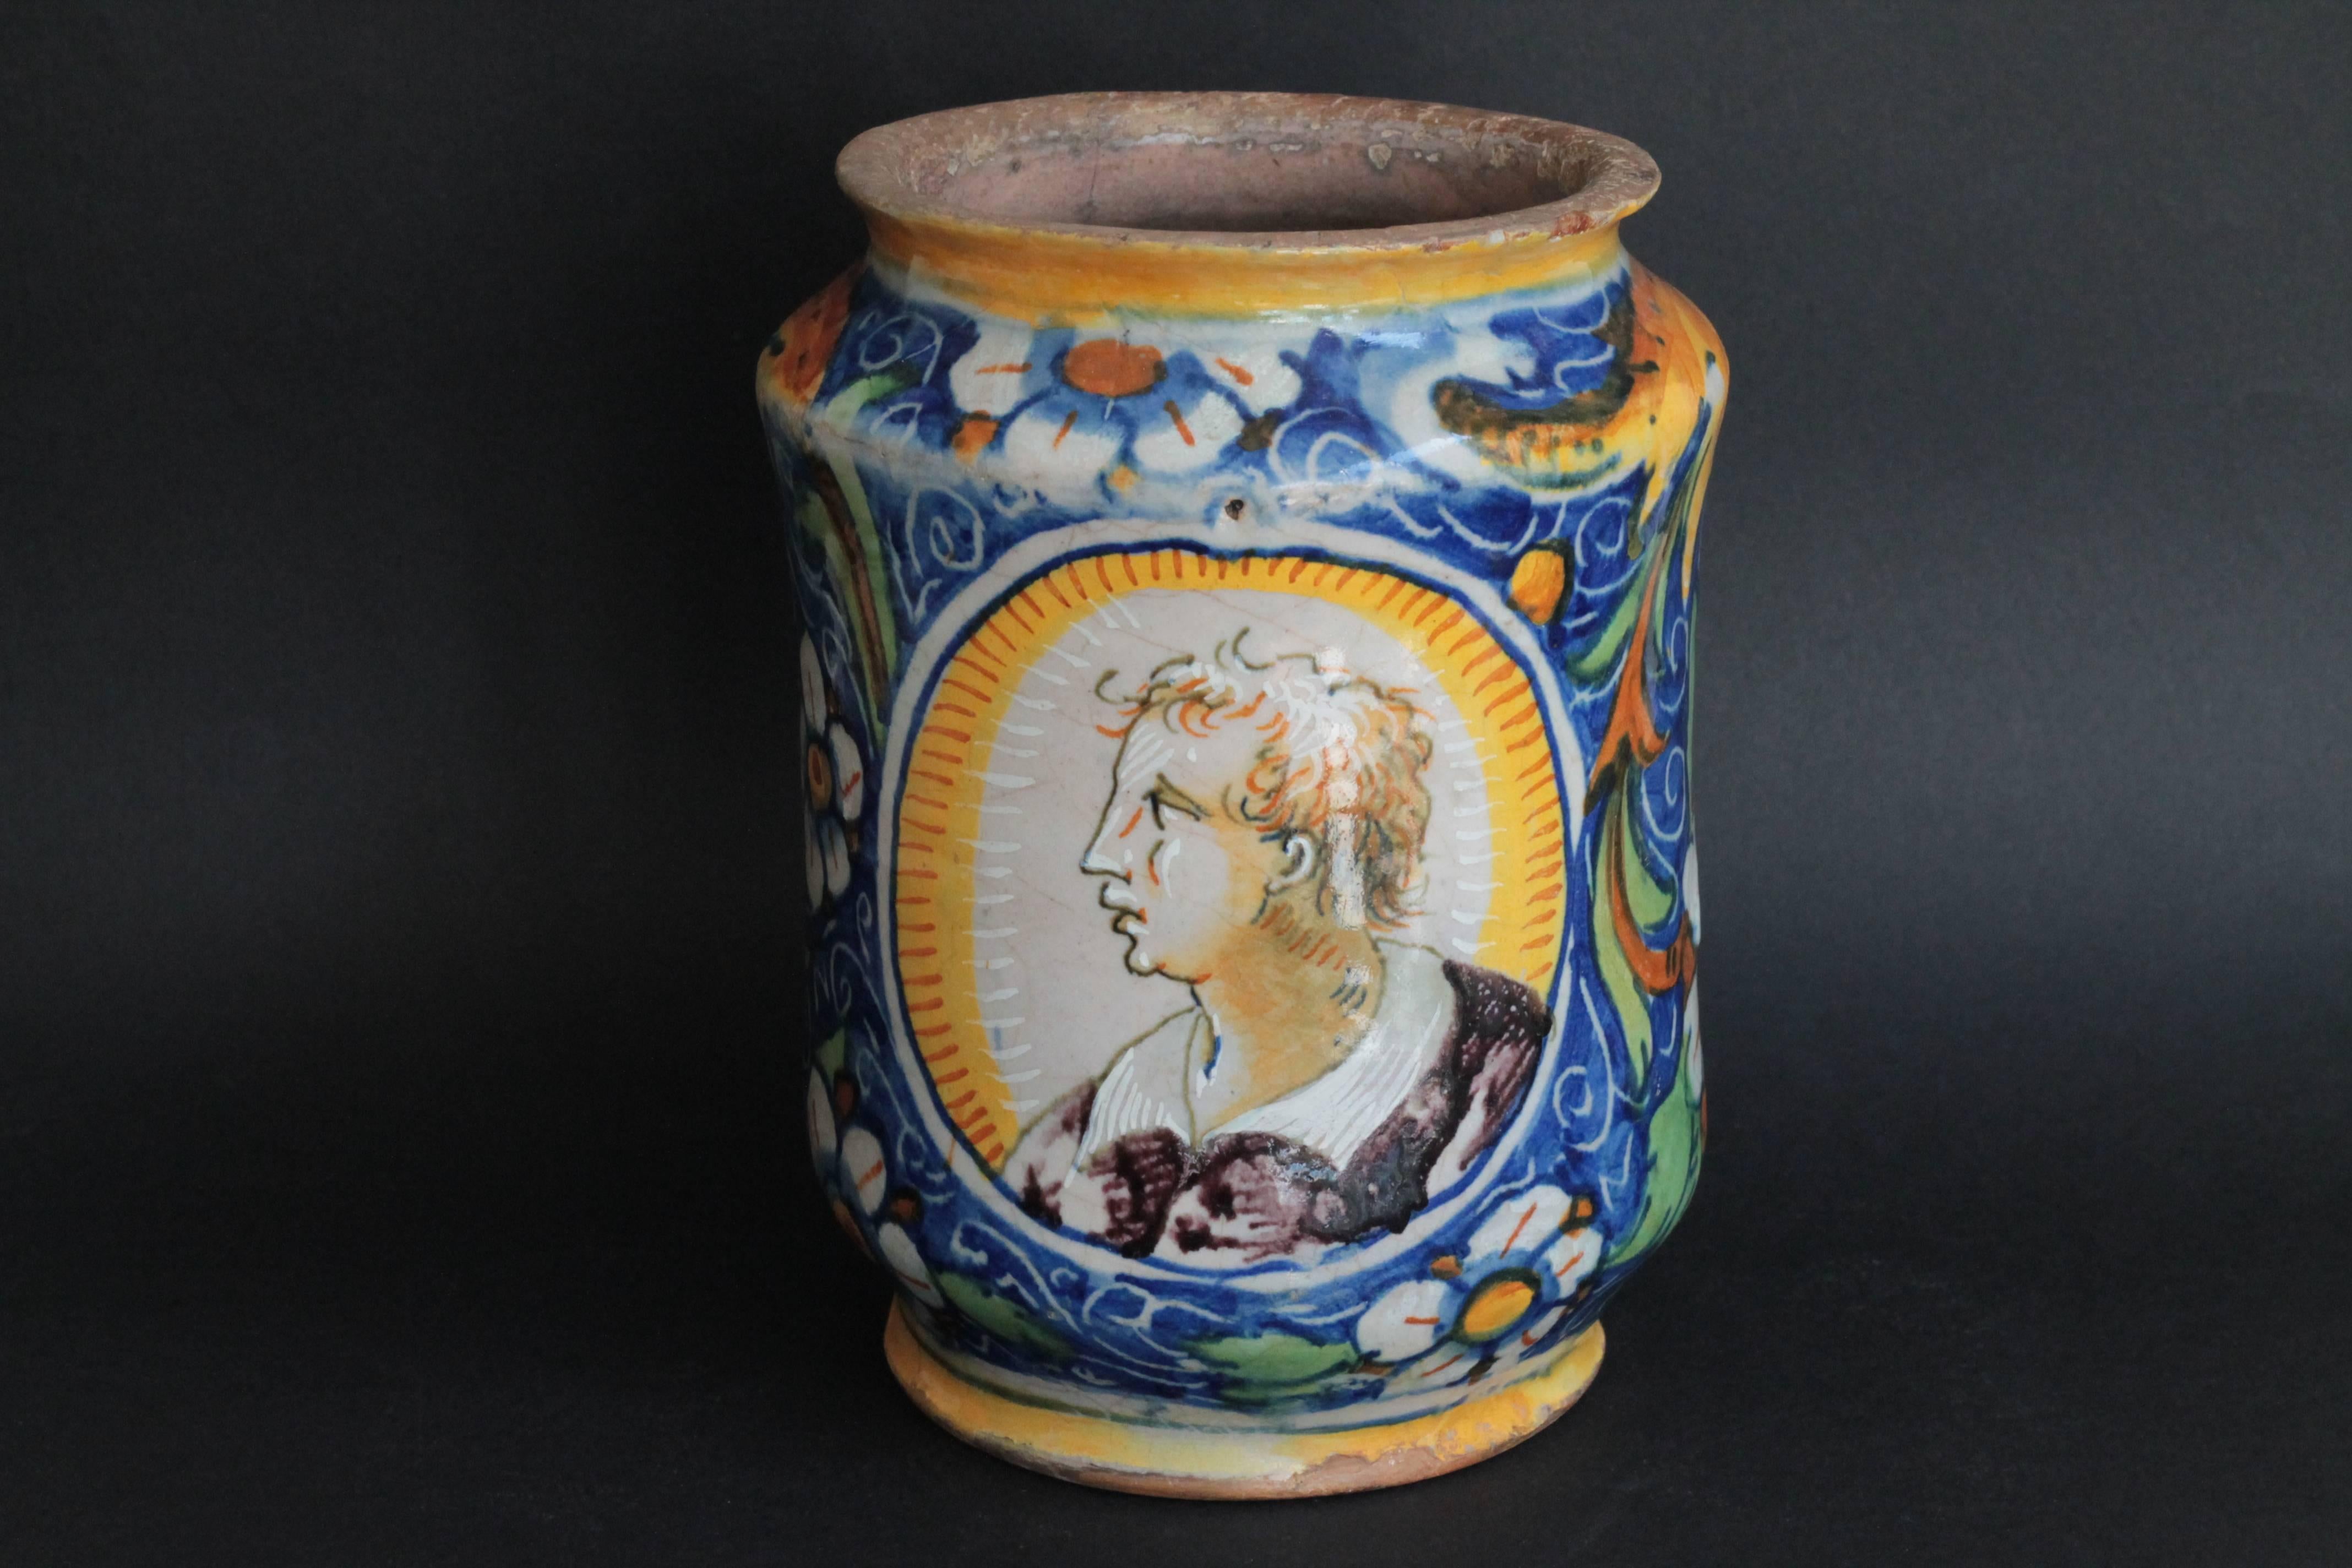 A Venice (Italy) Maiolica Albarello with polychrome decoration with a continuous dense floral and fruits on a blue ground and two portraits of young man of profile. 
Workshop of Maestro Domenico, circa 1570-1580. End of the 16th century.